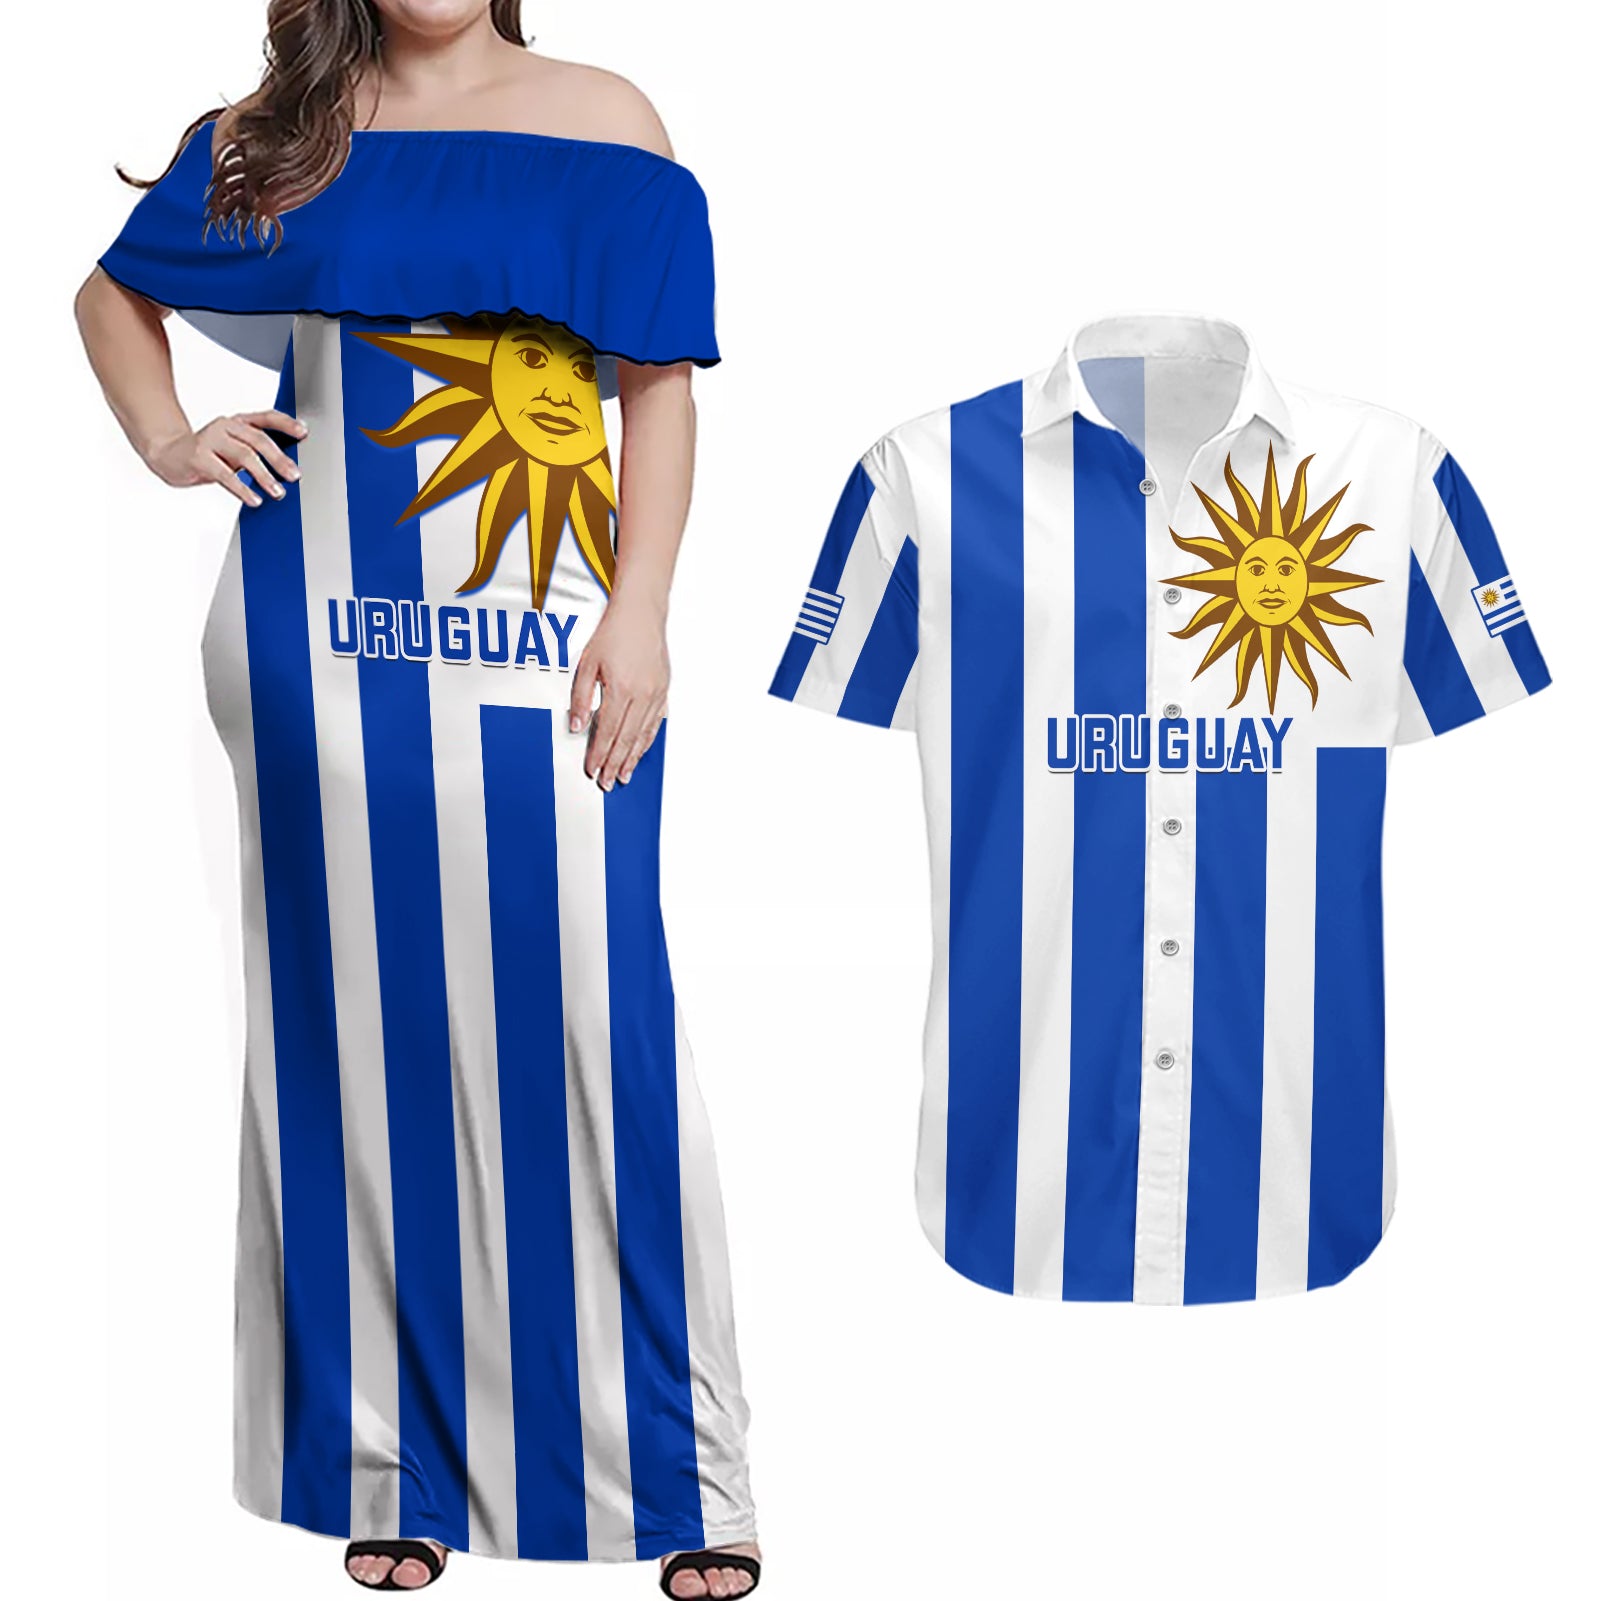 uruguay-rugby-couples-matching-off-shoulder-maxi-dress-and-hawaiian-shirt-go-los-teros-flag-style